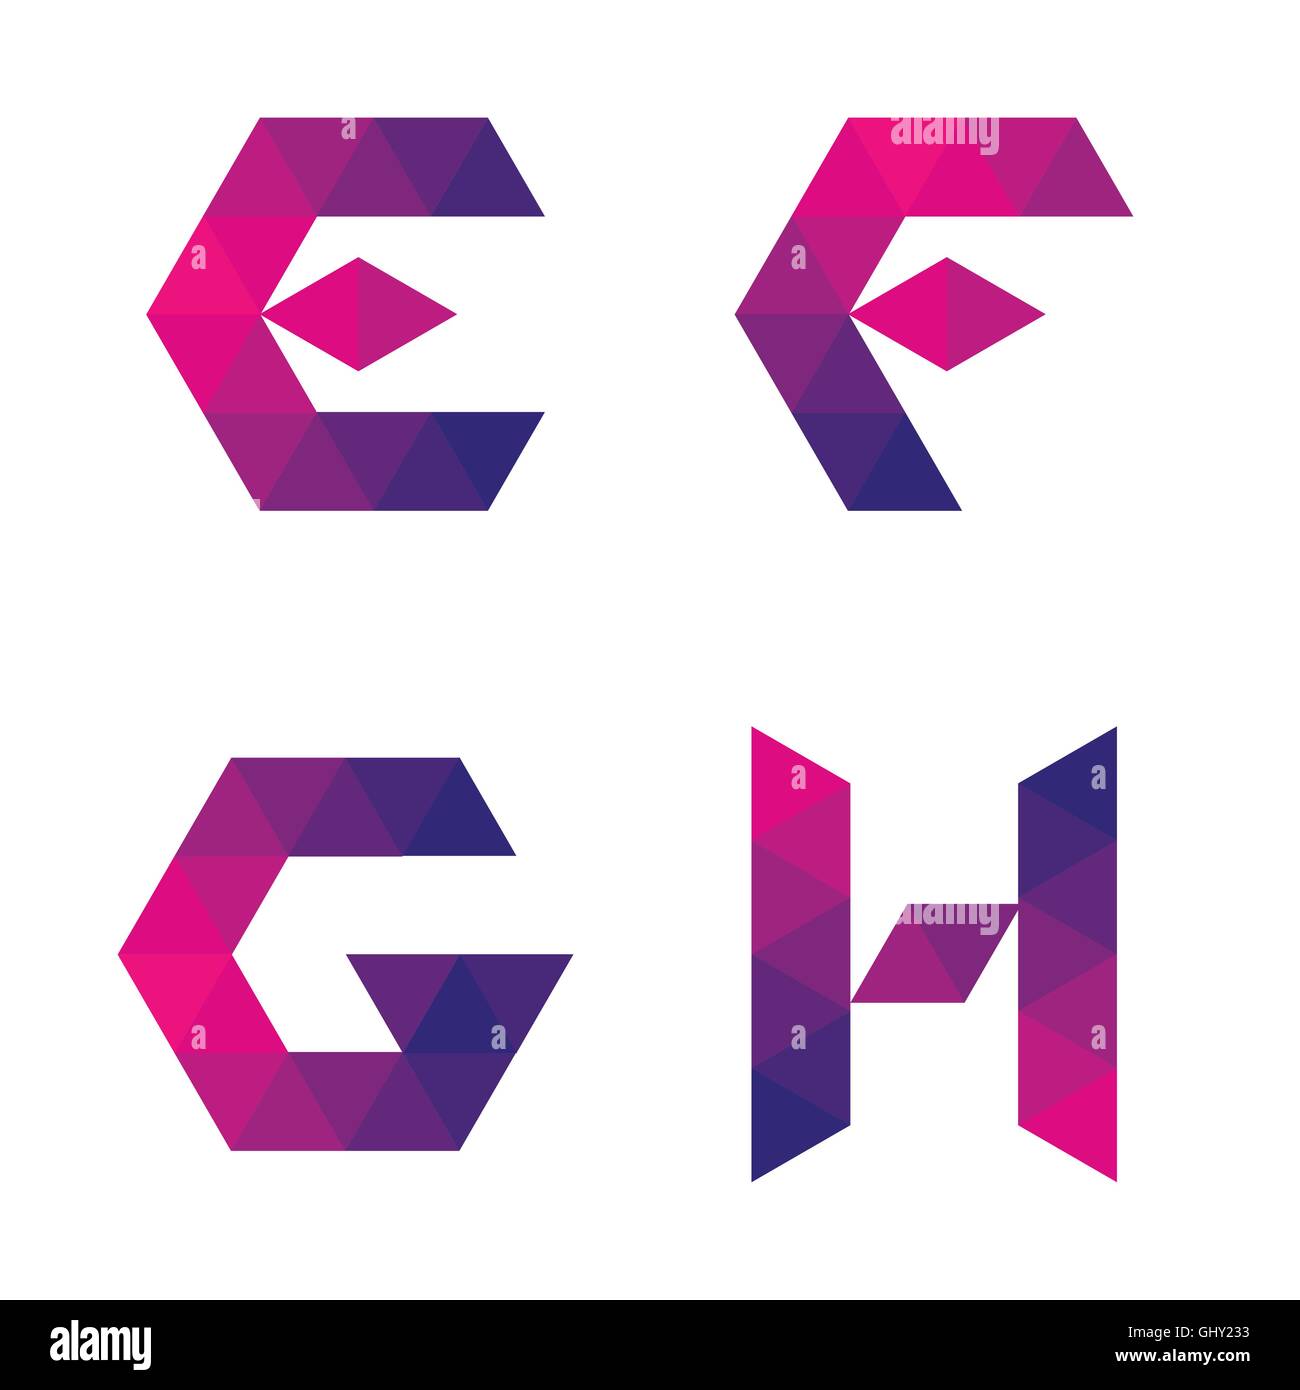 Series of letters e, f, g, h formed by colored triangles. Geometric shape. White background. Isolated. Stock Vector